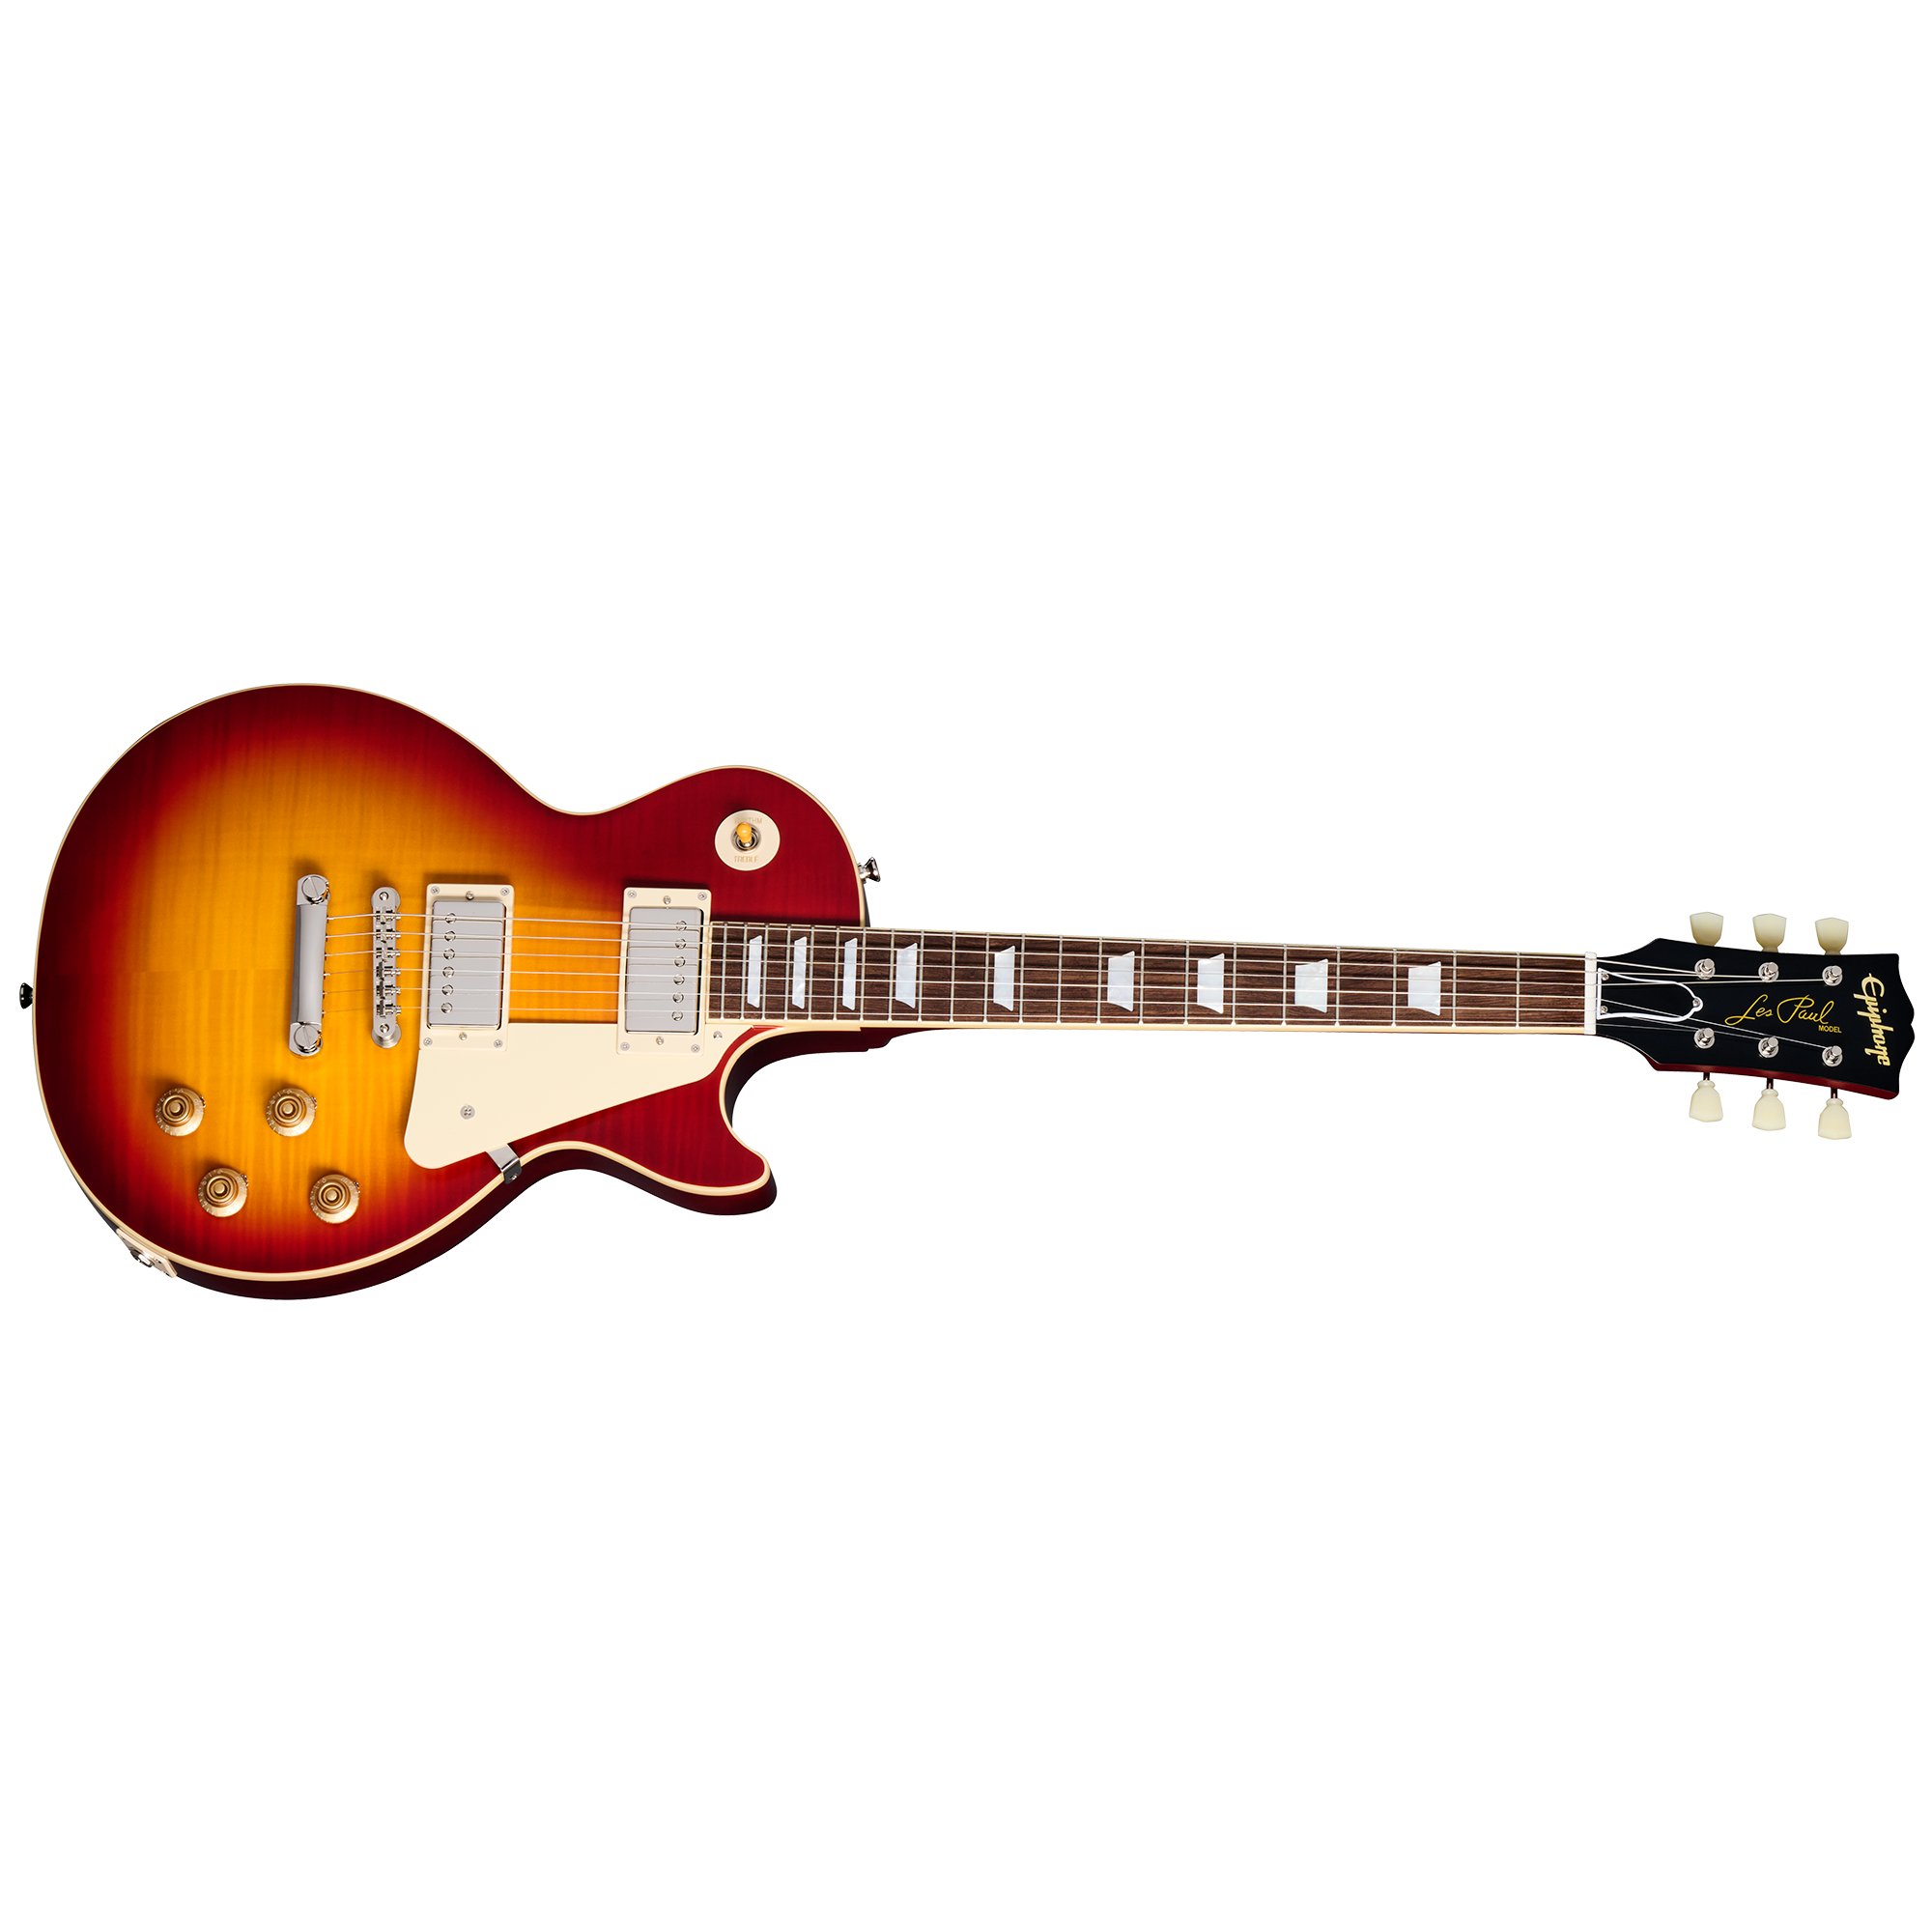 Epiphone ( GIBSON HEADTSOCK ) 1959 Les Paul Standard Electric Guitar with Case - Factory Burst ECLPS59FAVNH